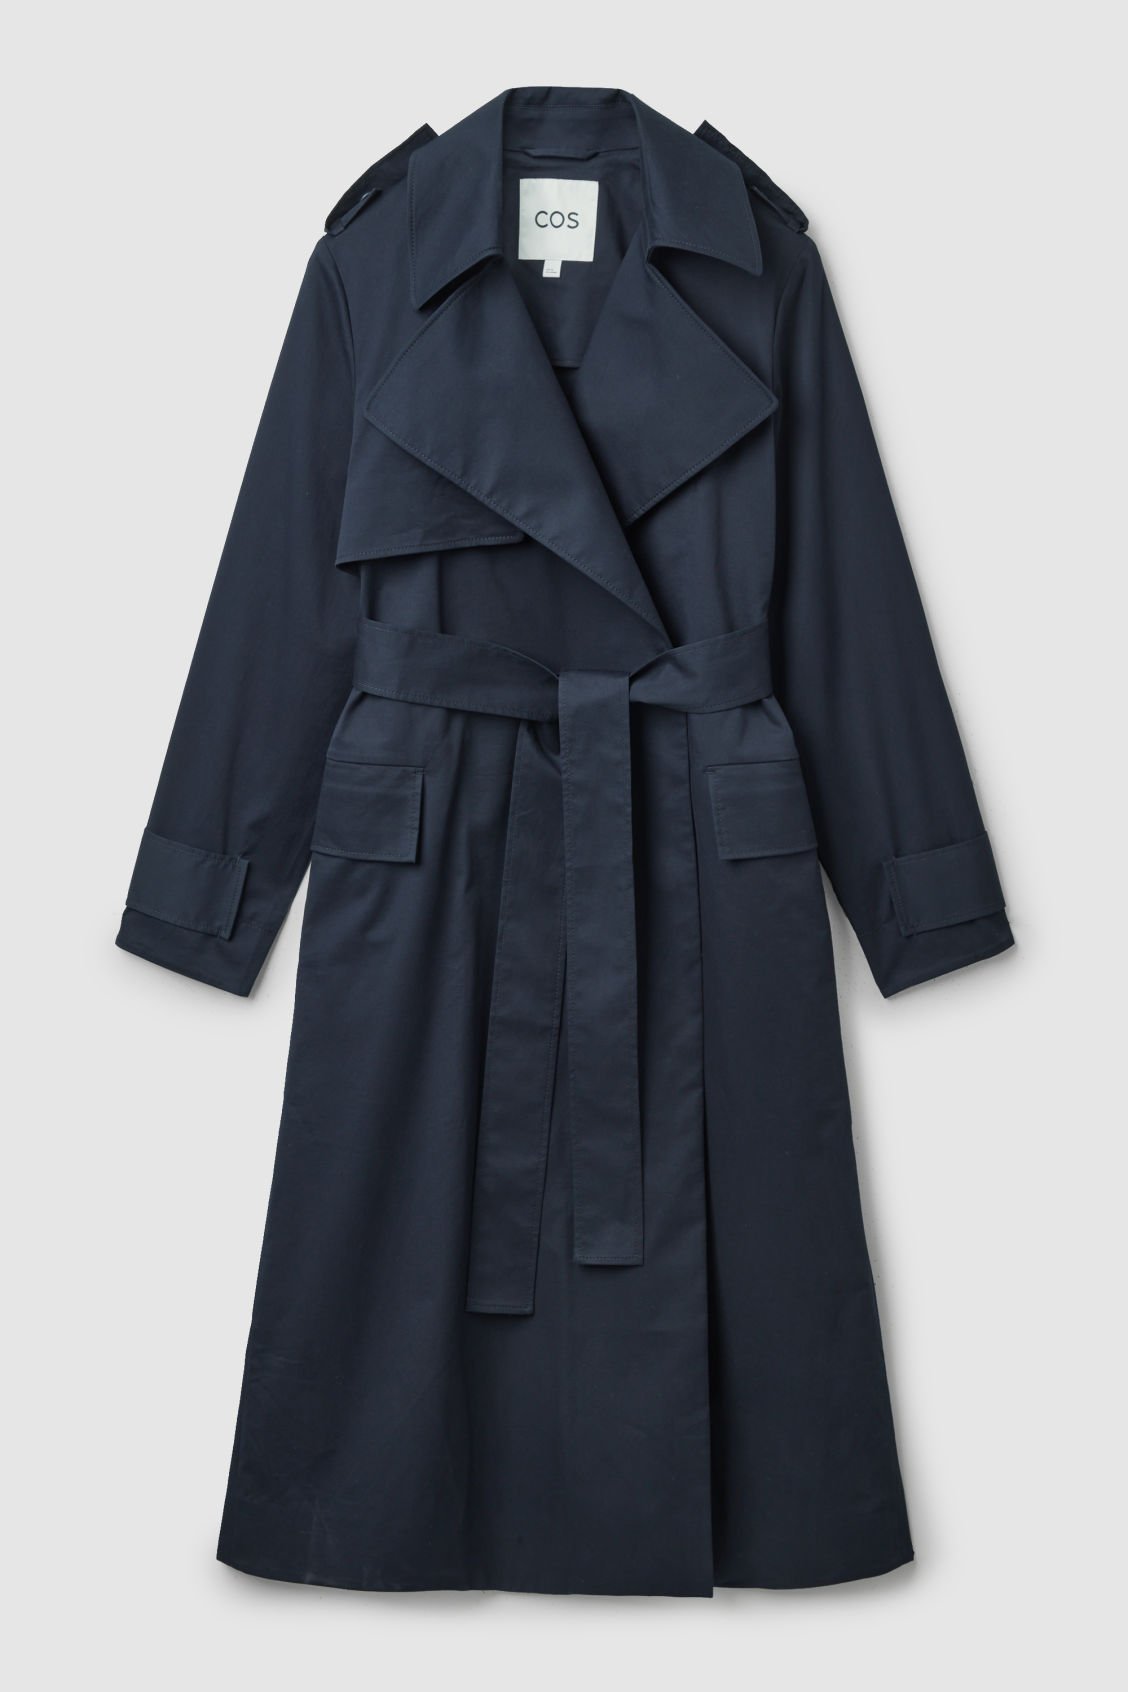 Fashion Inspiration: How to Style the Classic Trench Coat from Late Winter to Early Spring